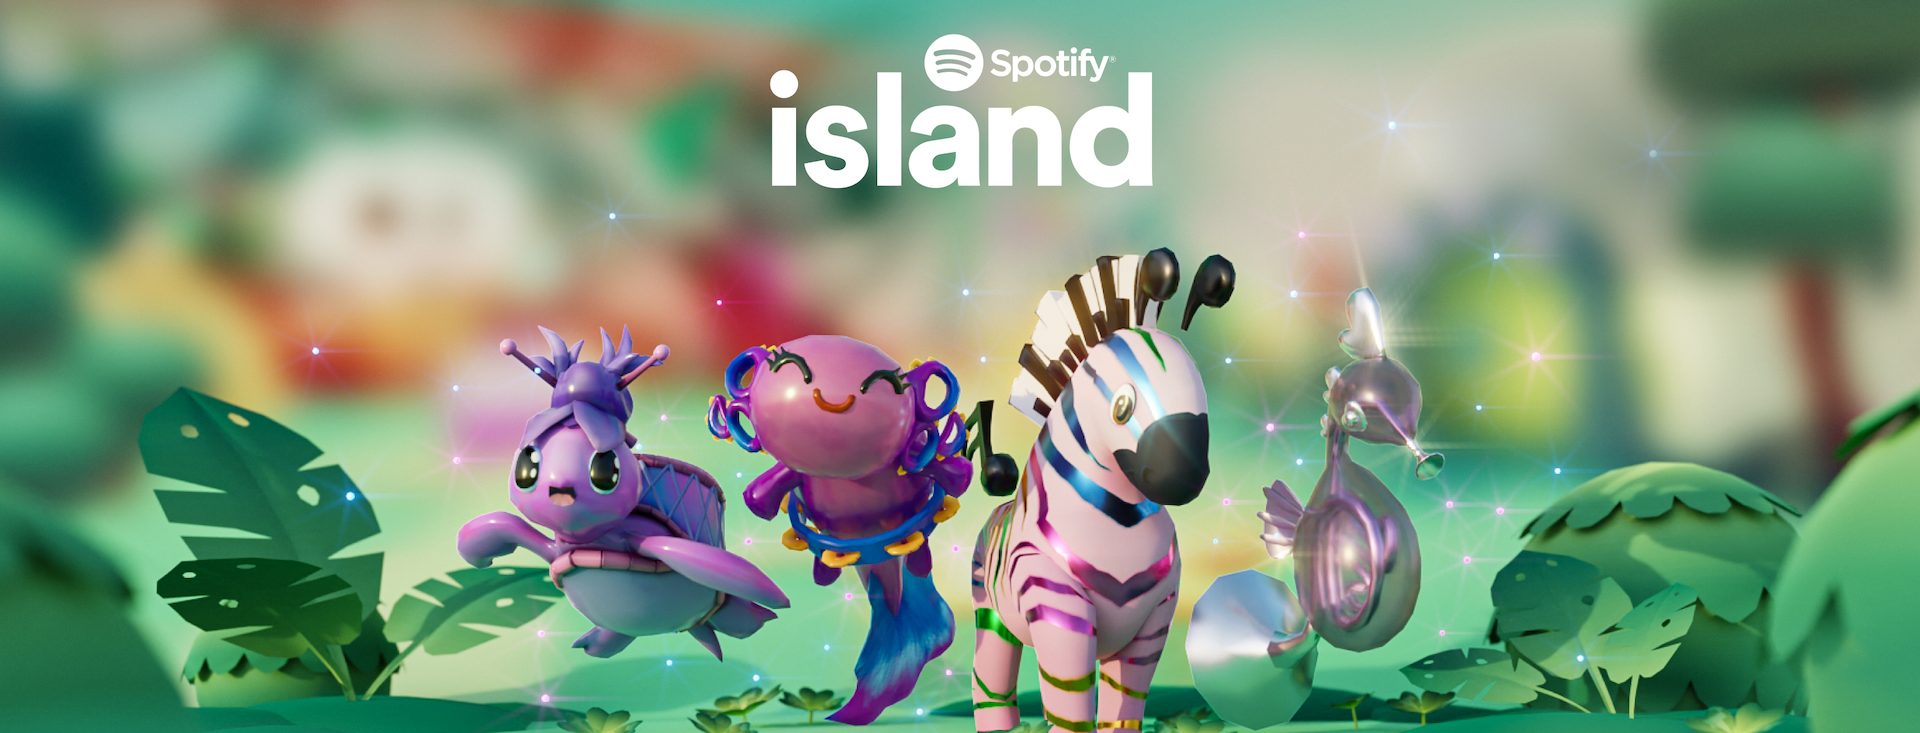 Spotify Island on Roblox Expands With New Destinations, Minigames (and Pets!) — Spotify